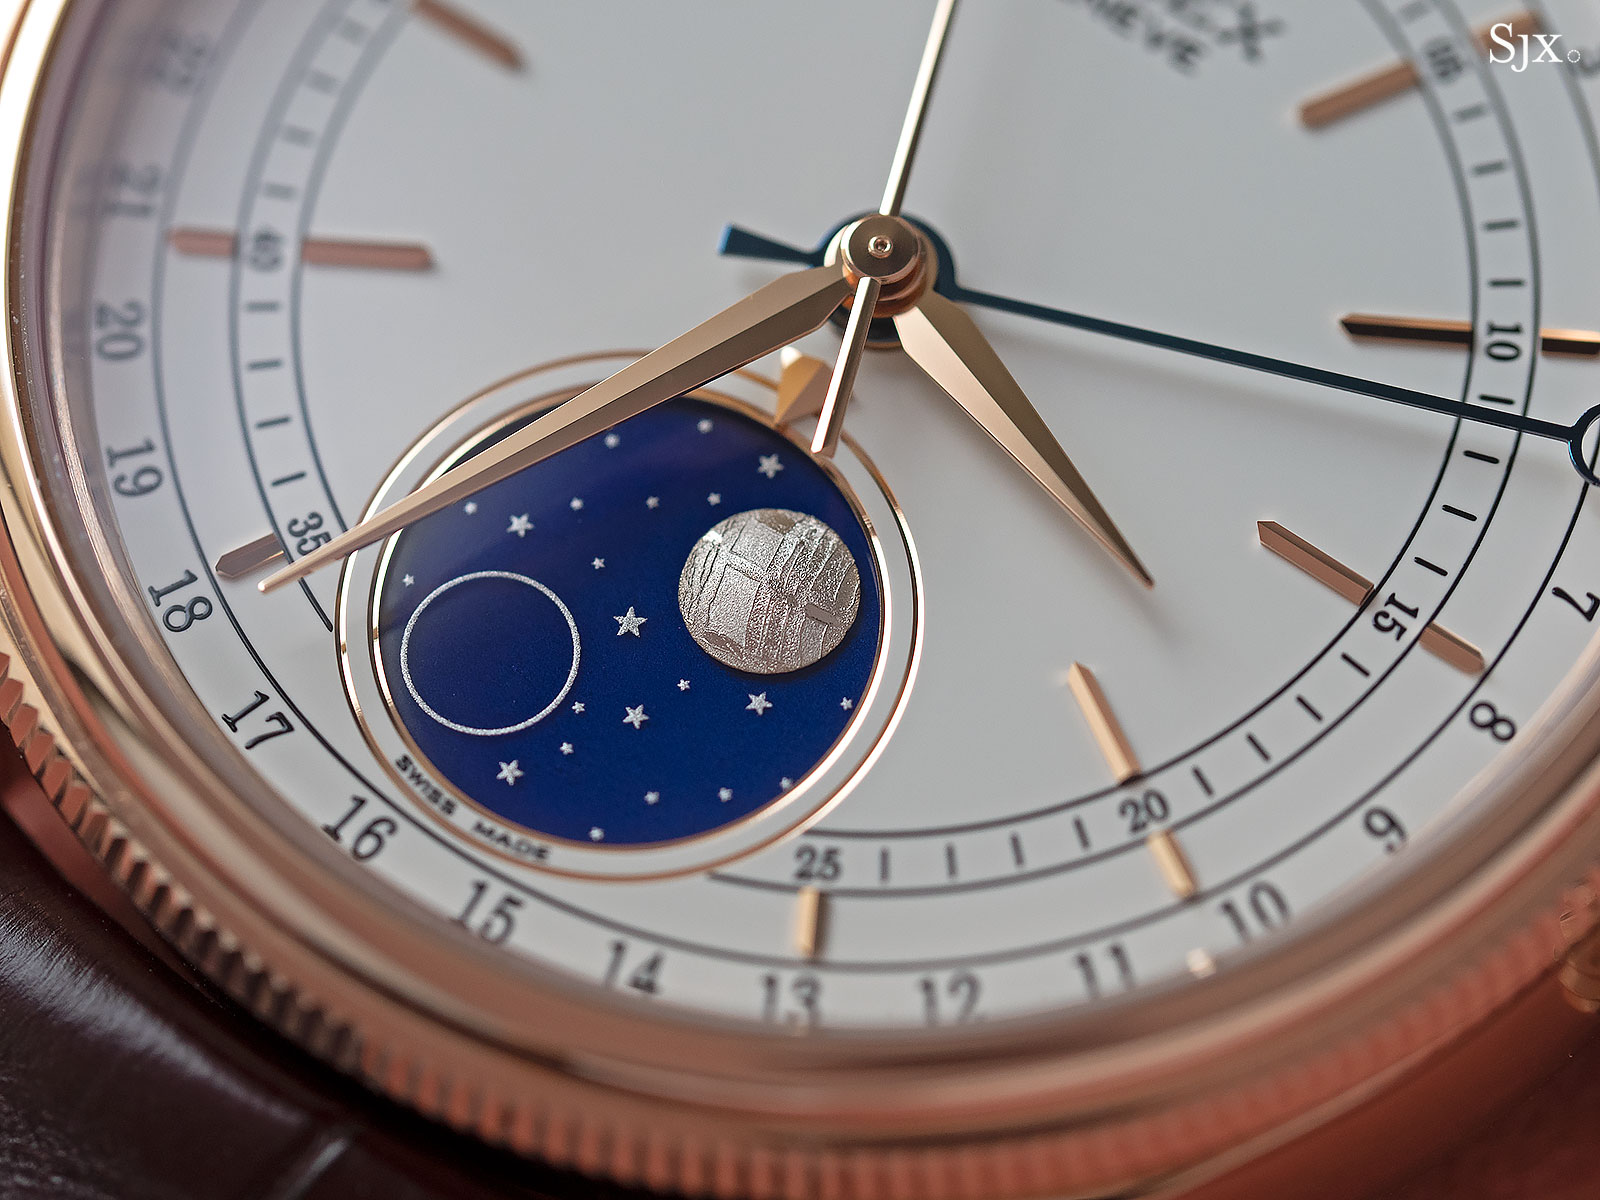 Rolex Cellini Moonphase 50535 review 2